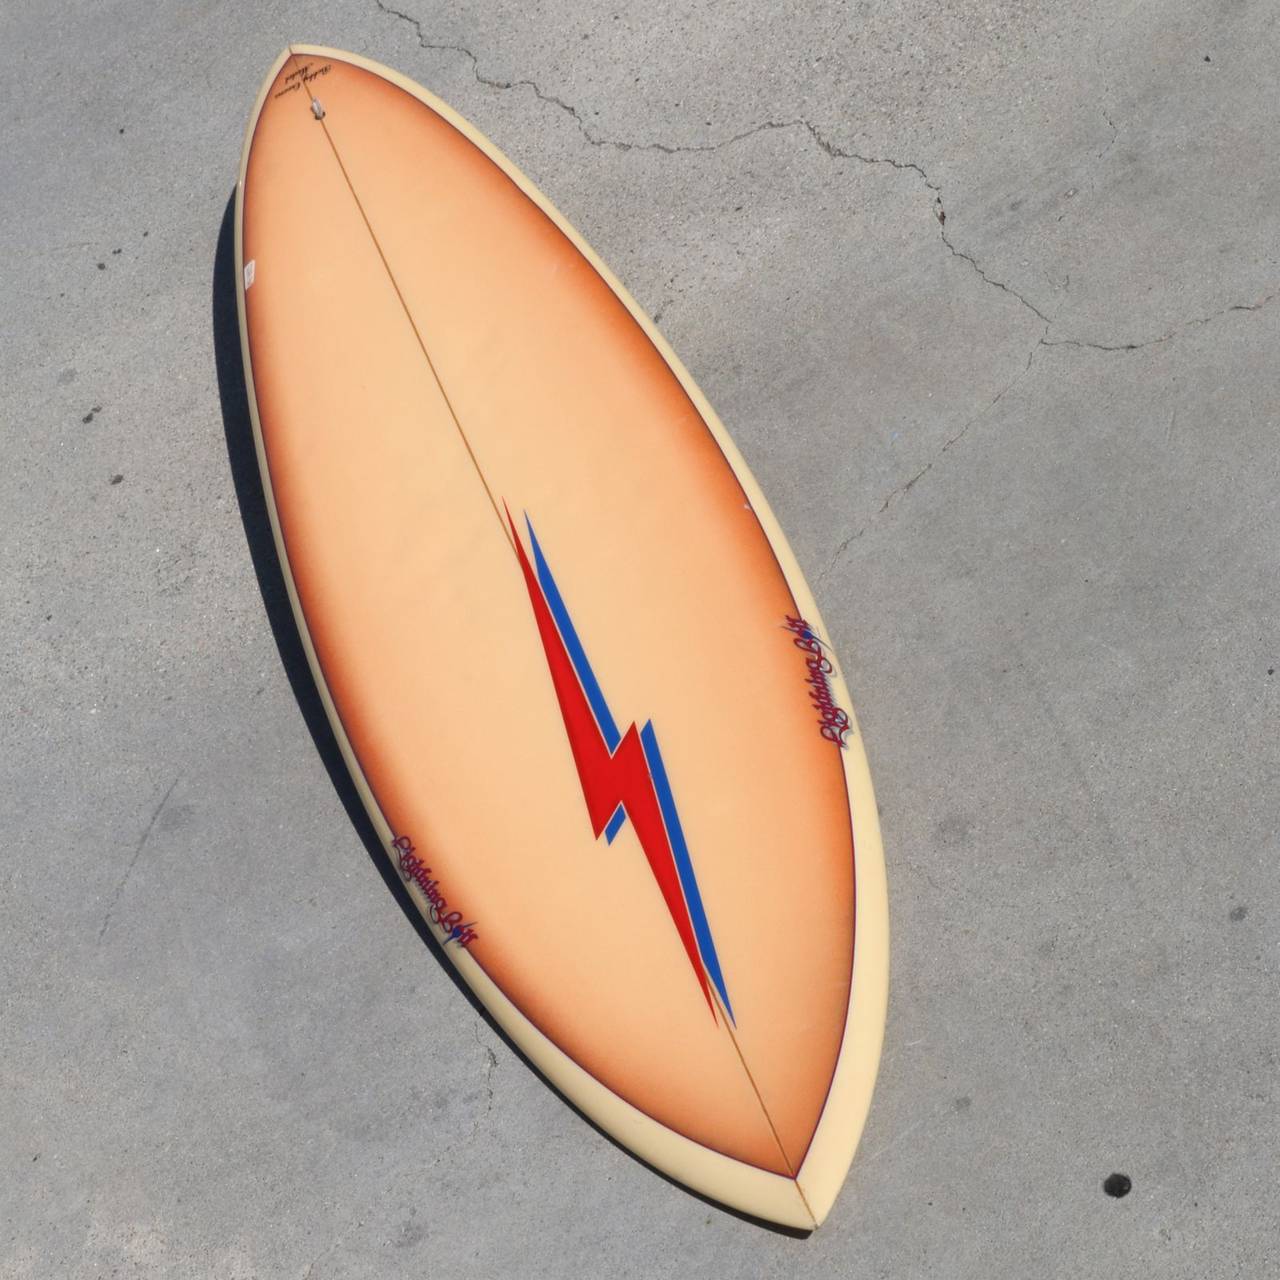 American Rare and Beautiful Bobby Owens Lightning Bolt Surfboard, Late 1970s